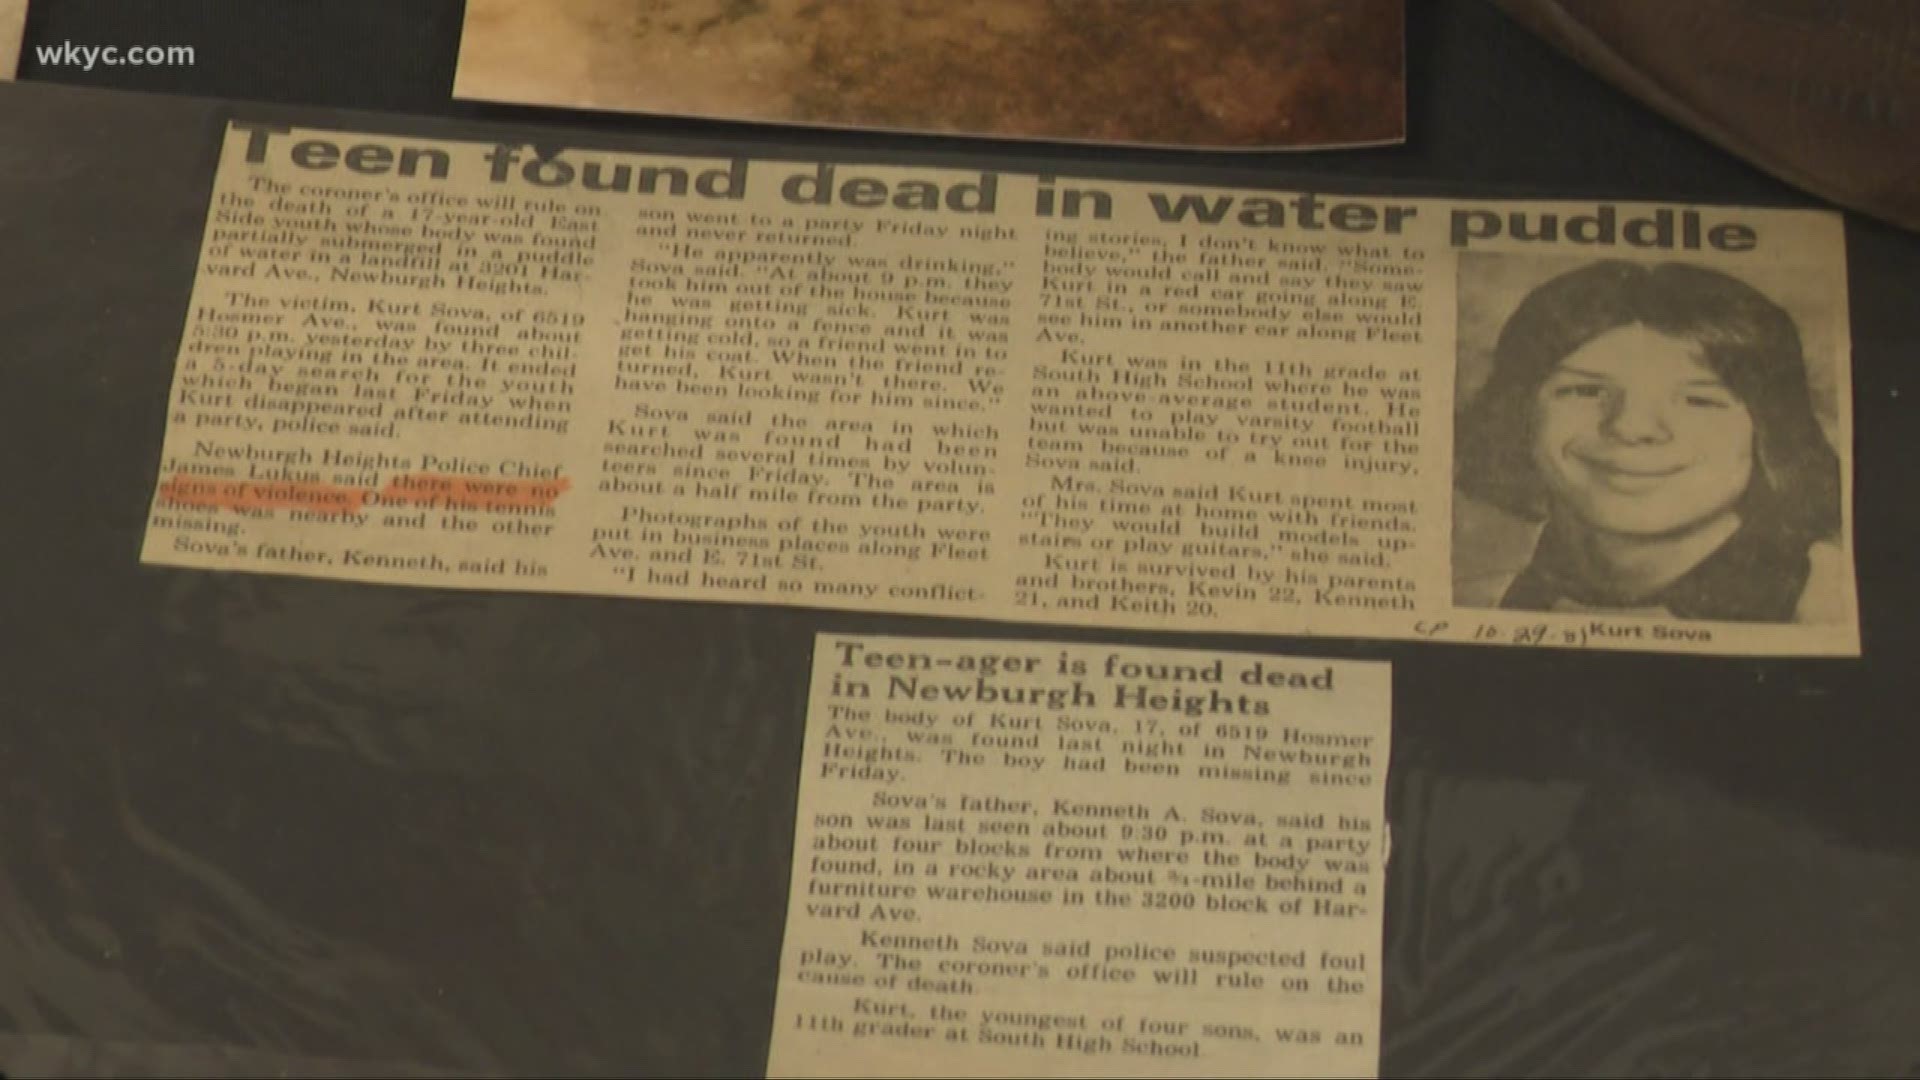 17-year-old Kurt Sova was found dead in a water puddle nearly four decades ago, but his killer still hasn't been caught. Mark Naymik reports.